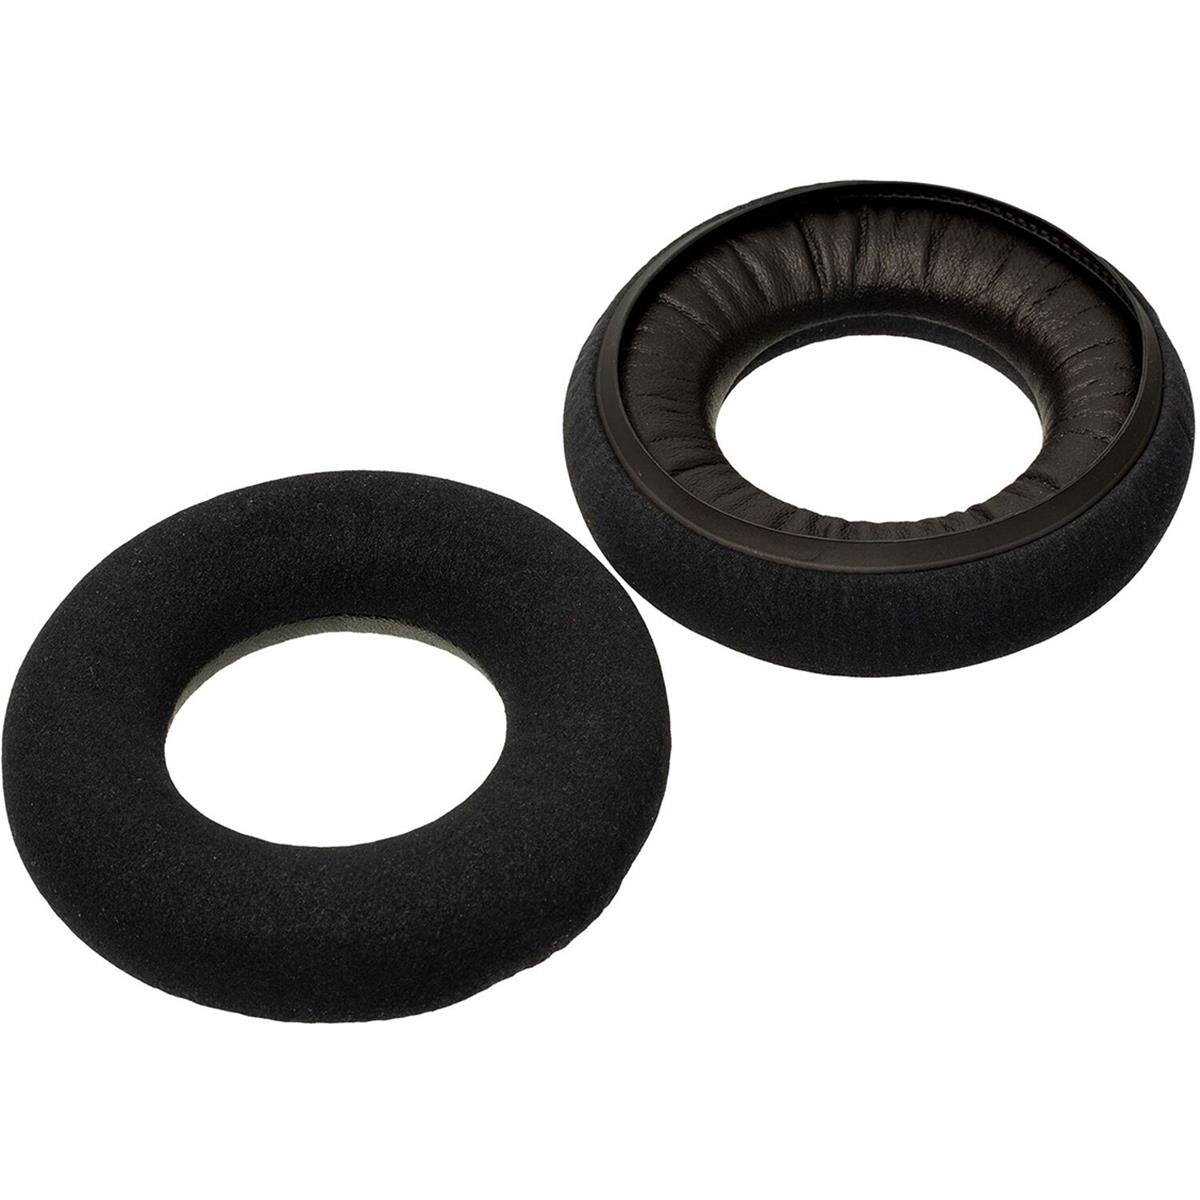 Image of Neumann Replacement Earpads for NDH 20 Studio Headphone